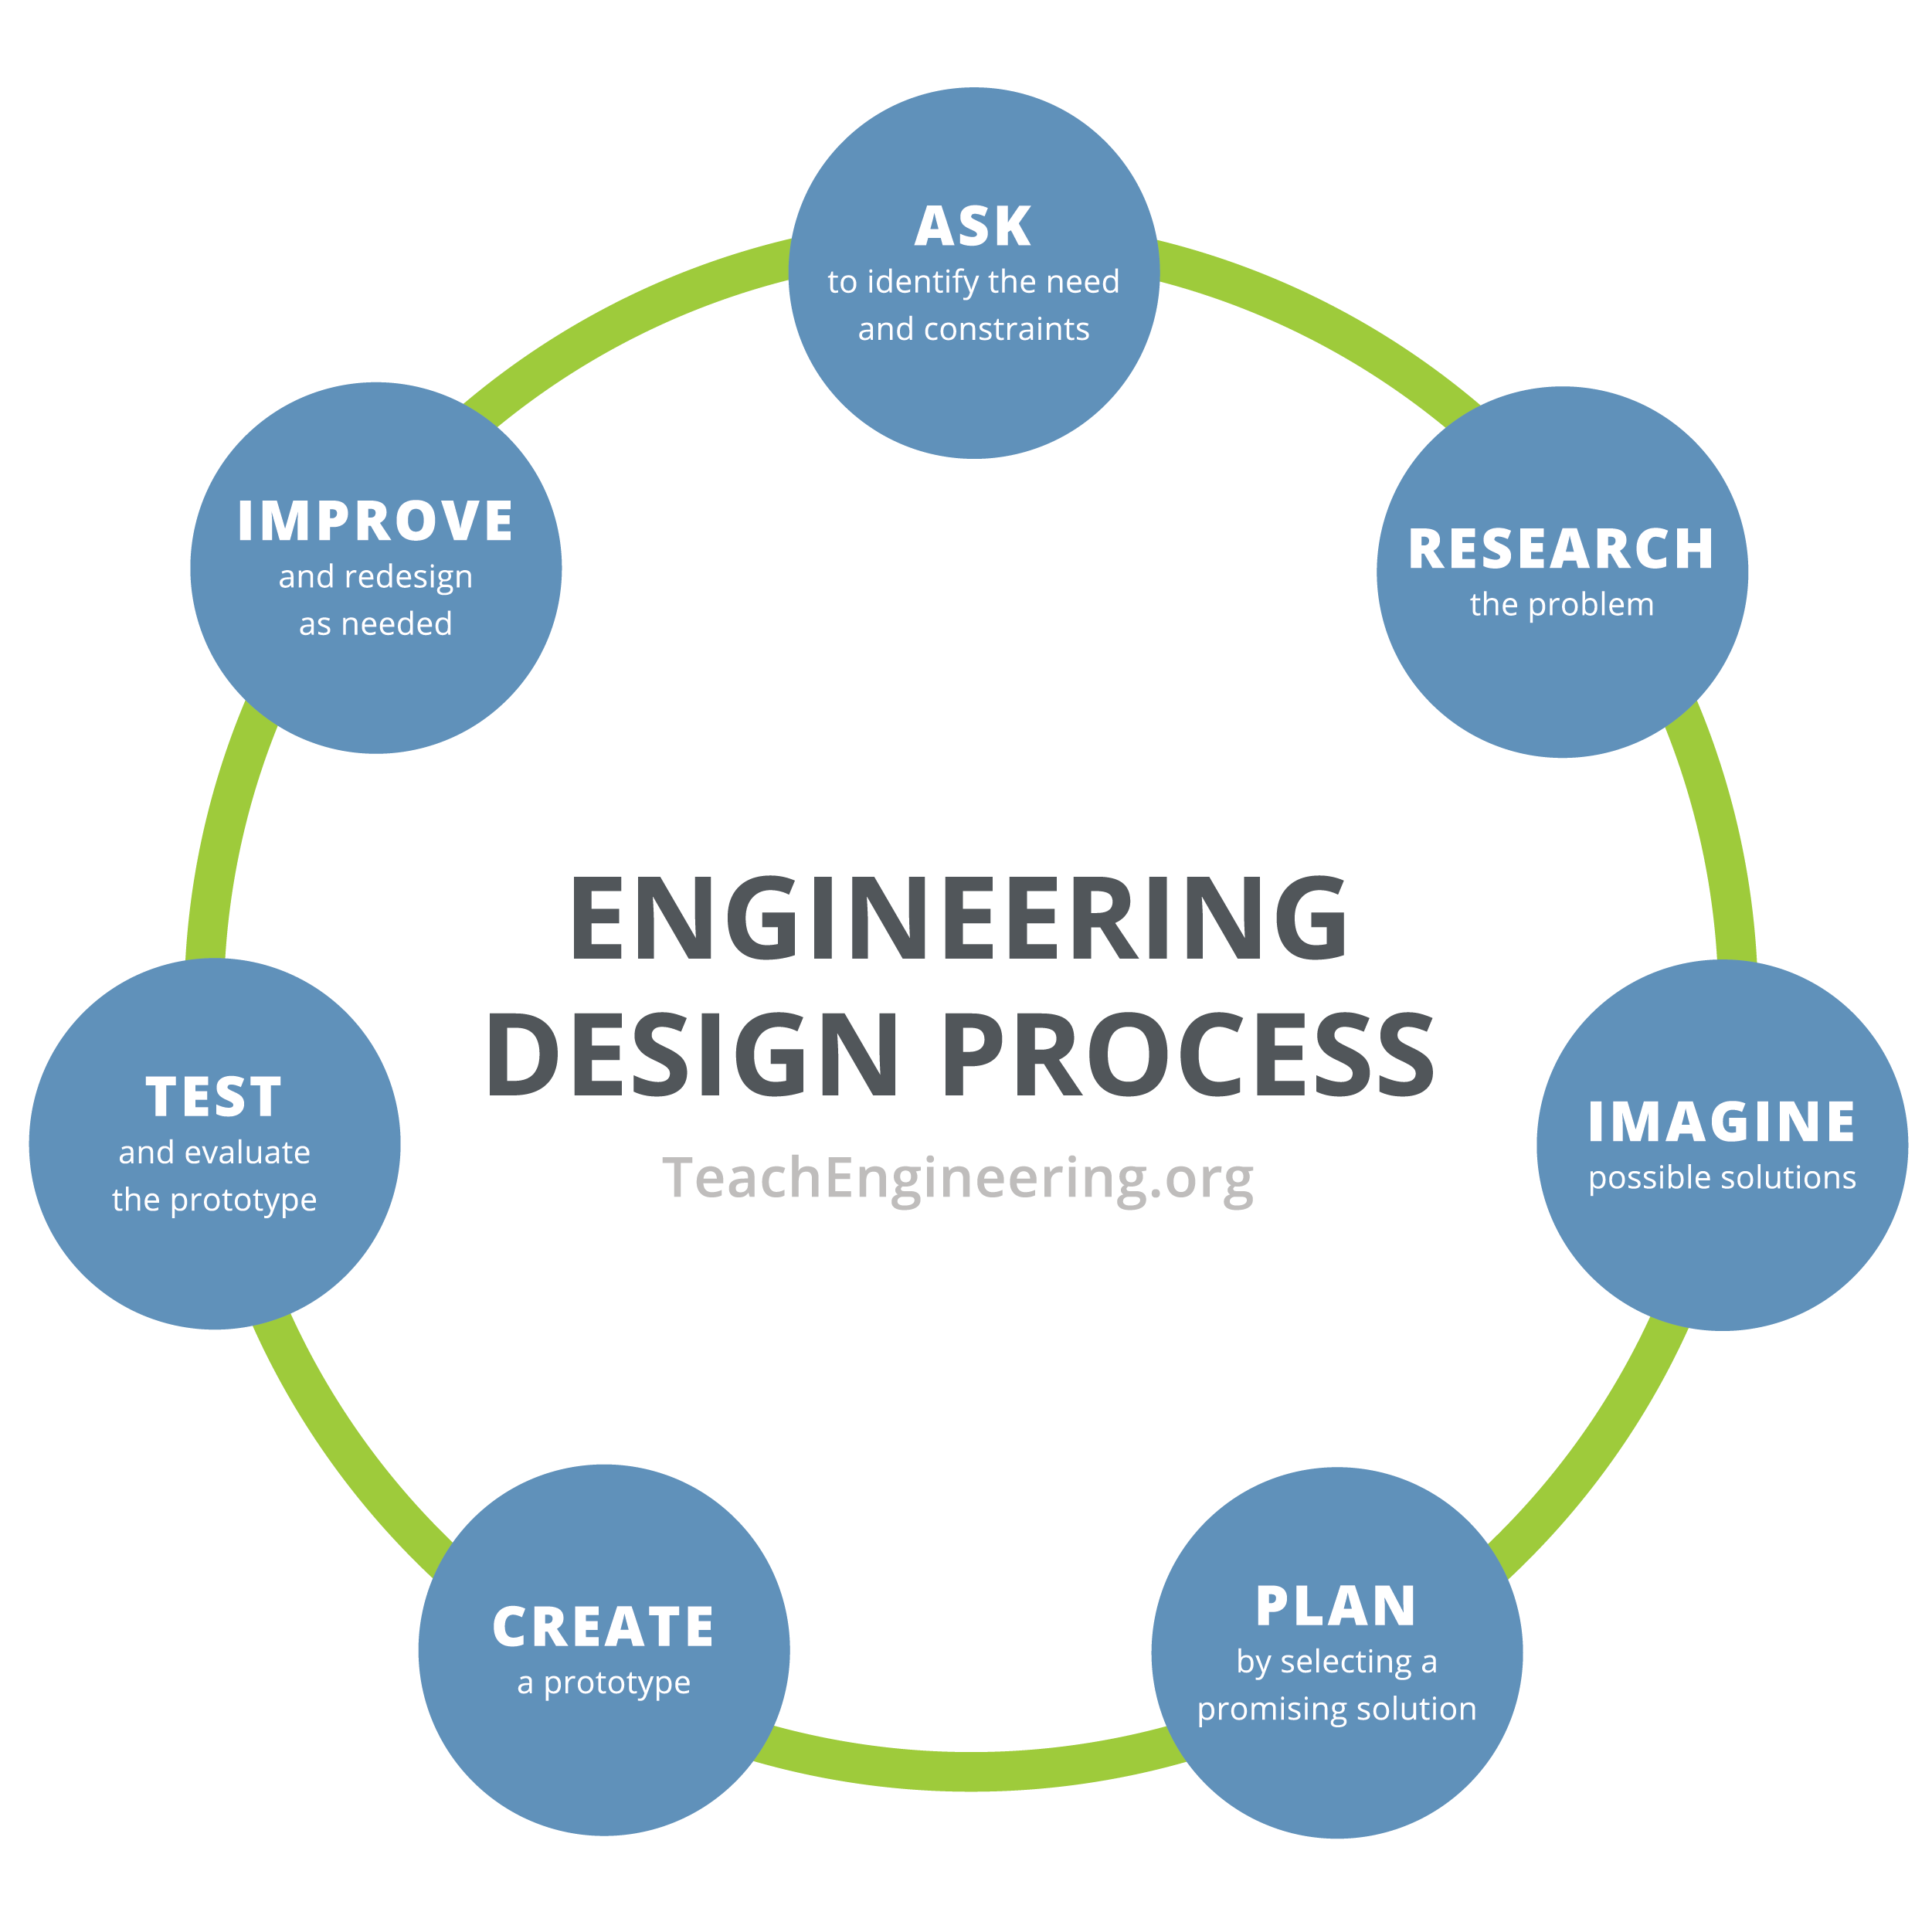 Circular diagram shows steps of the engineering design process: identify the need, research the problem, develop possible solutions, select the most promising solution, construct a prototype, test and evaluate the prototype, communicate the design, and redesign.